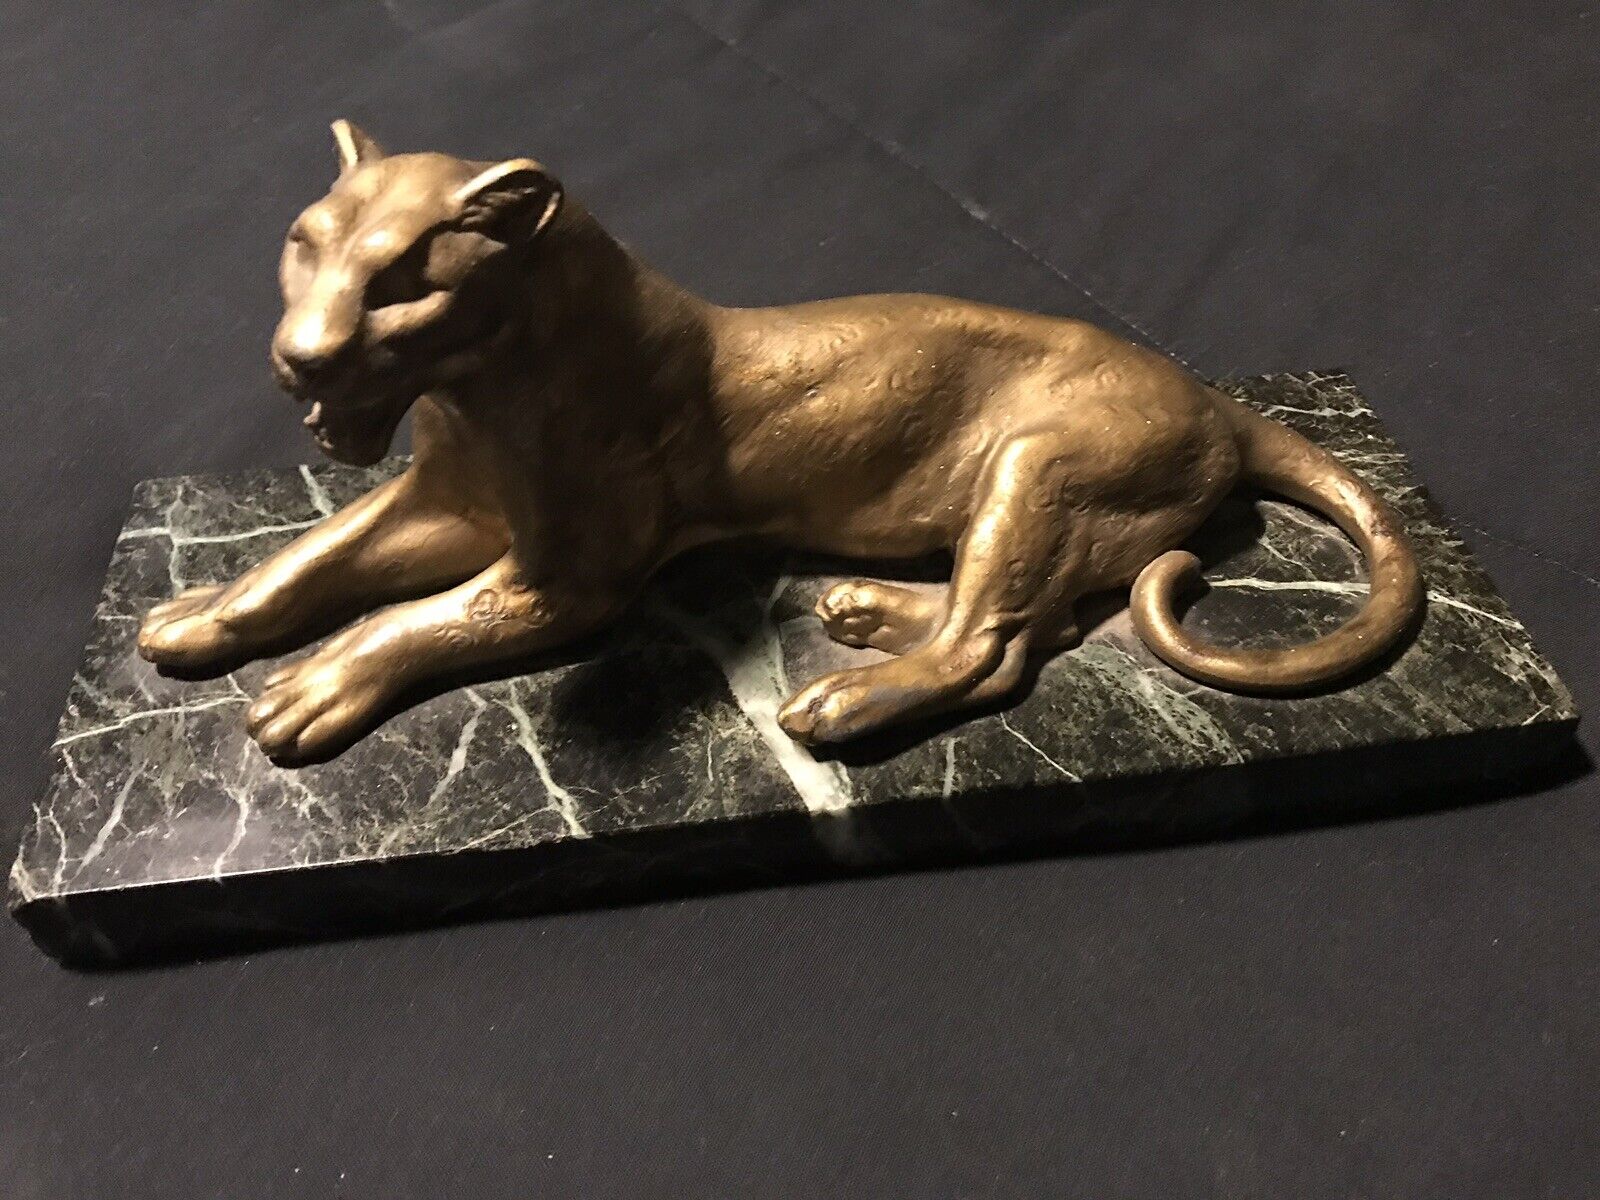 LOUIS CARVIN 1920s FRENCH ART DECO BRONZE SCULPTURE PANTHER FRANCE